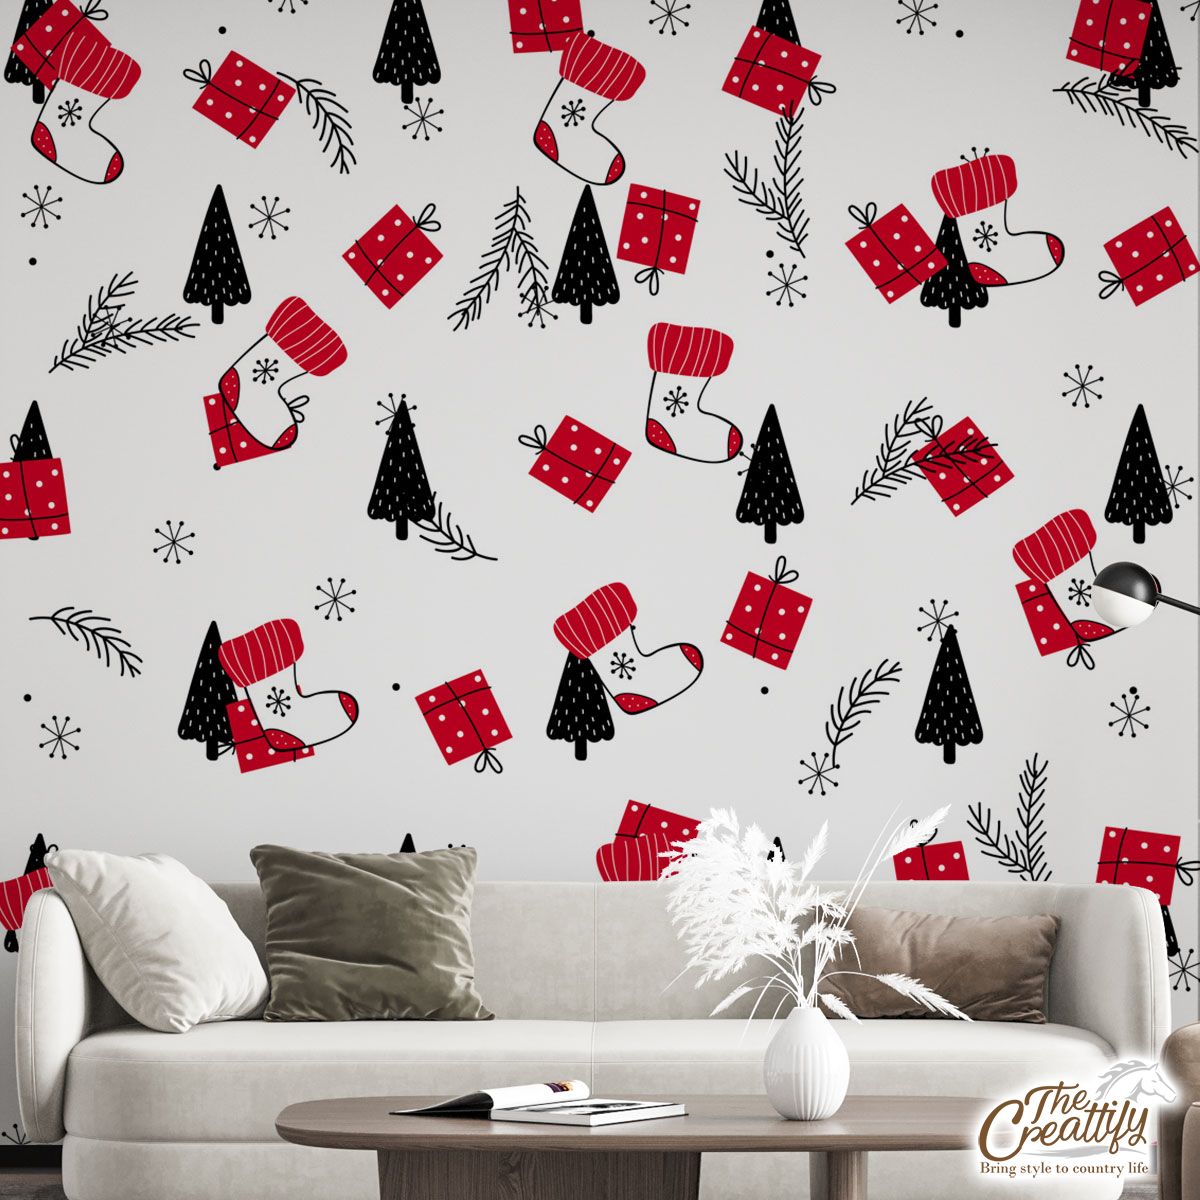 Hand Drawn Red Socks, Christmas Gifts, Pine Tree Silhouette And Snowflake Clipart Seamless White Pattern Wall Mural